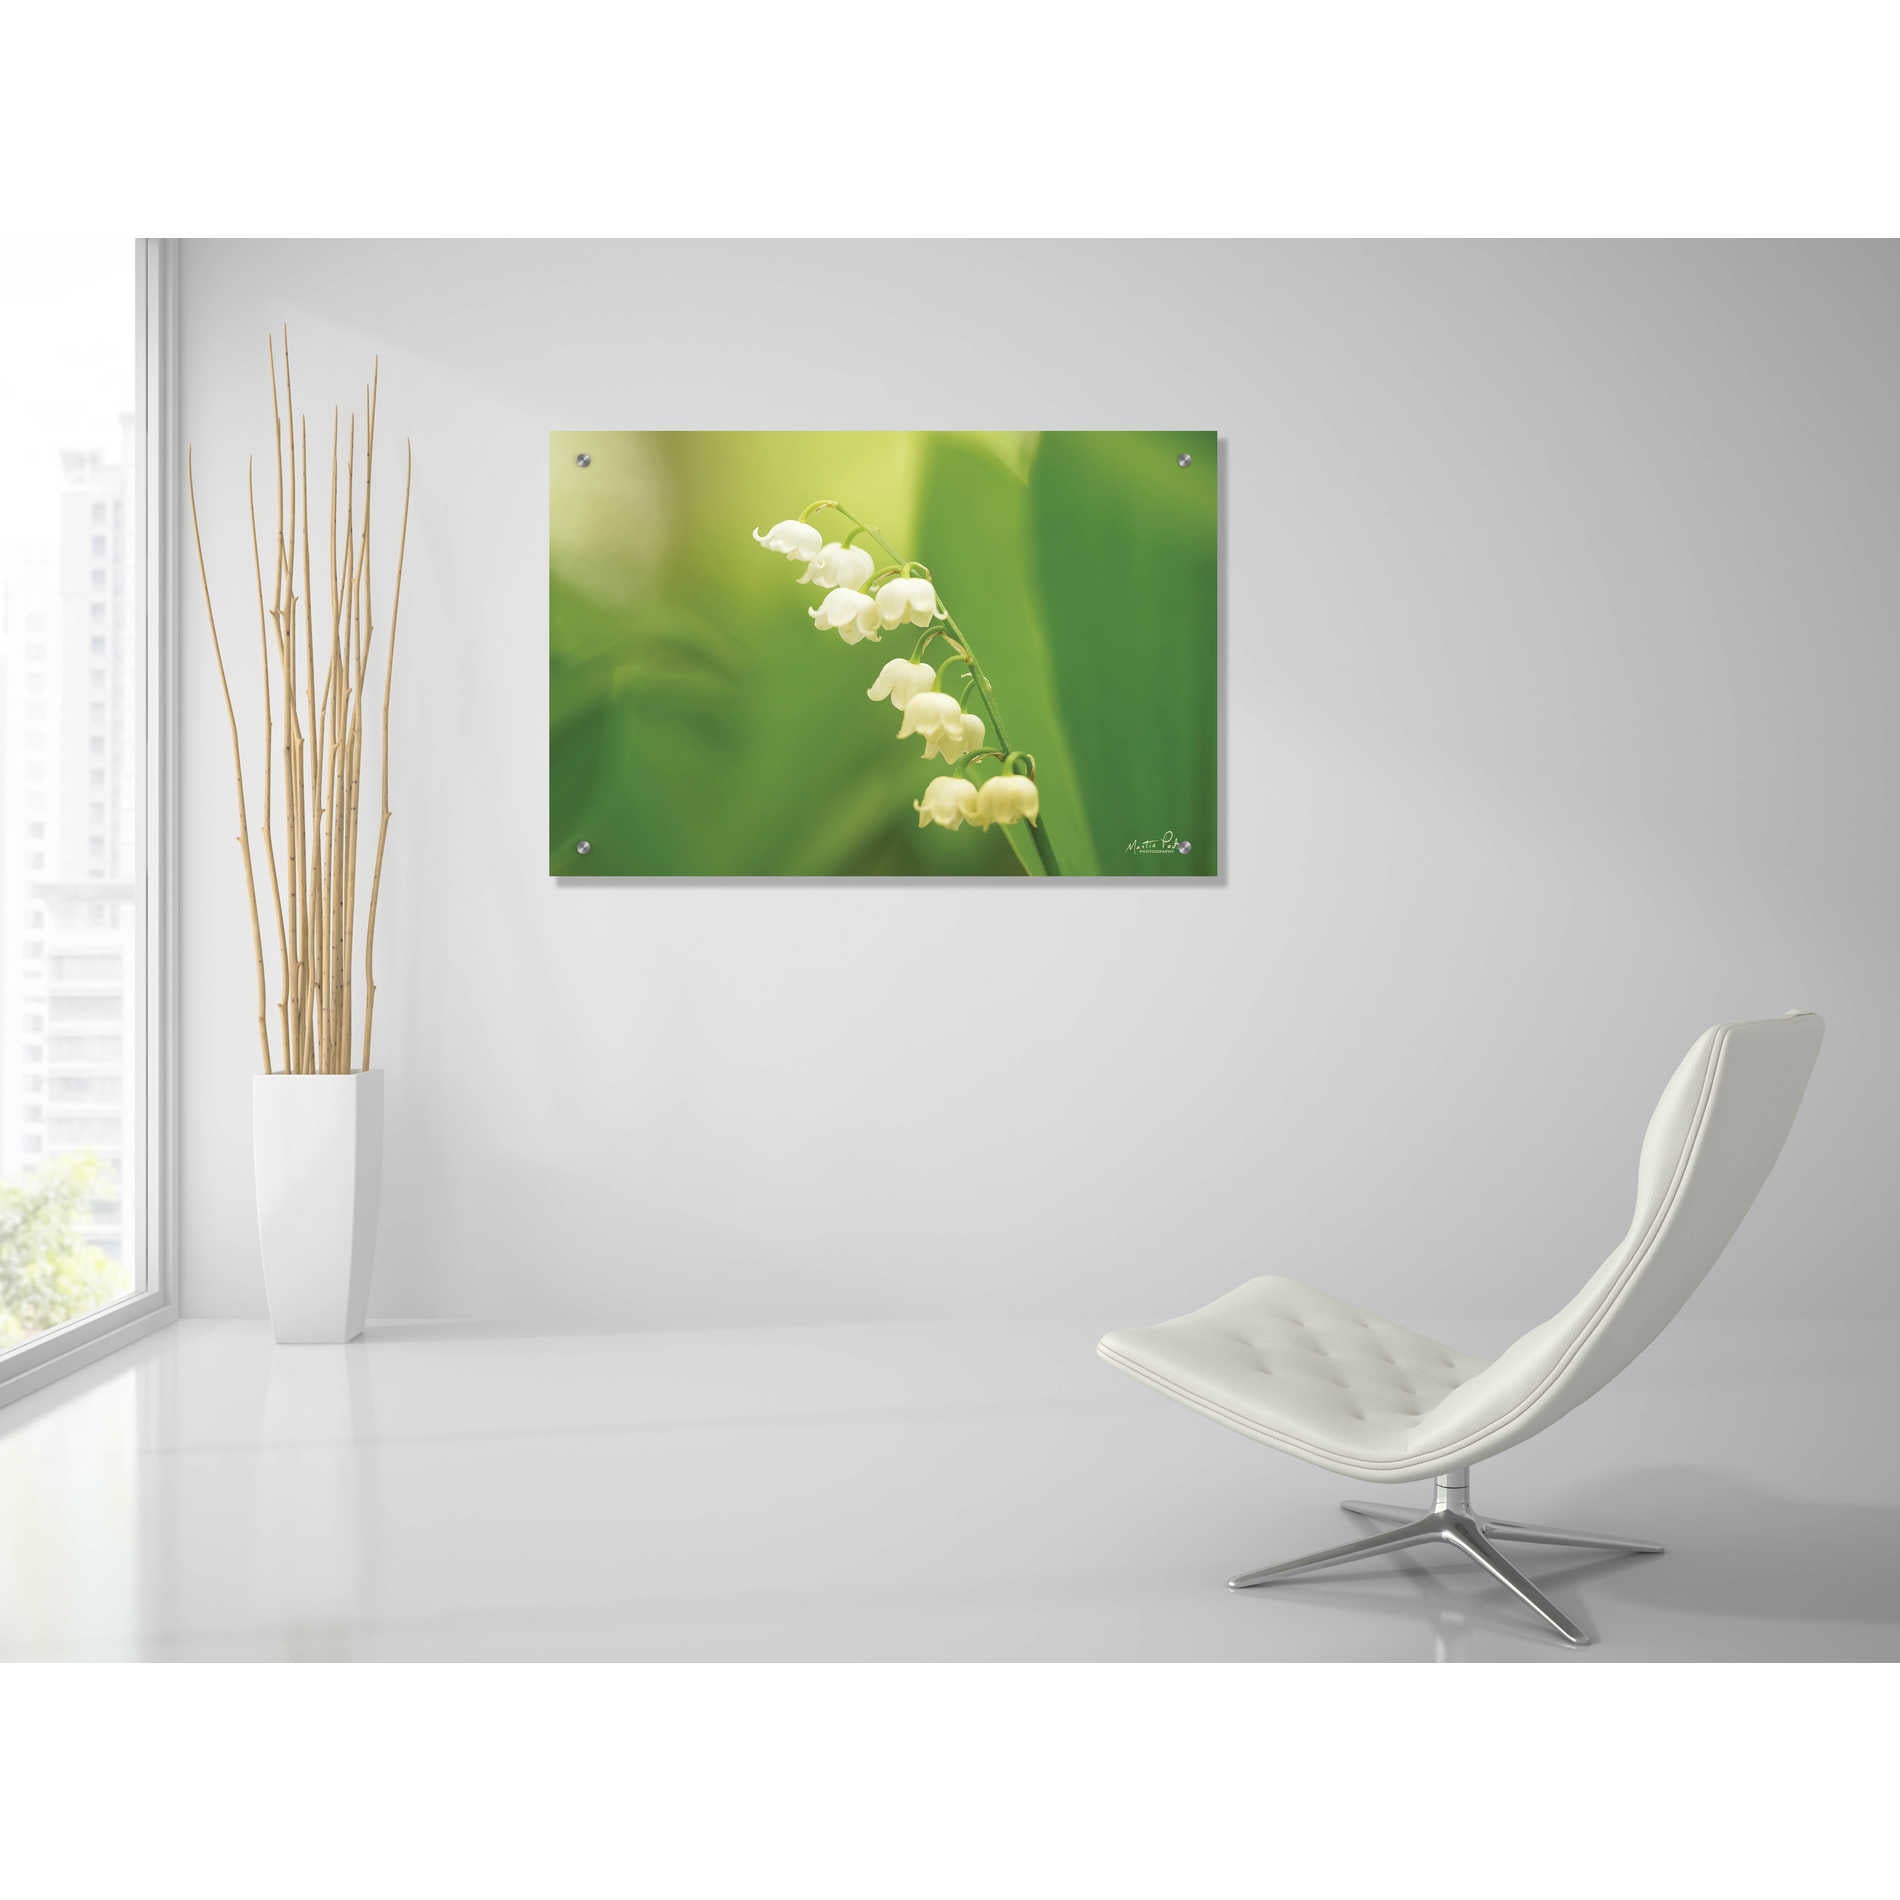 Epic Art 'Lily of the Valley' by Martin Podt, Acrylic Glass Wall Art,36x24